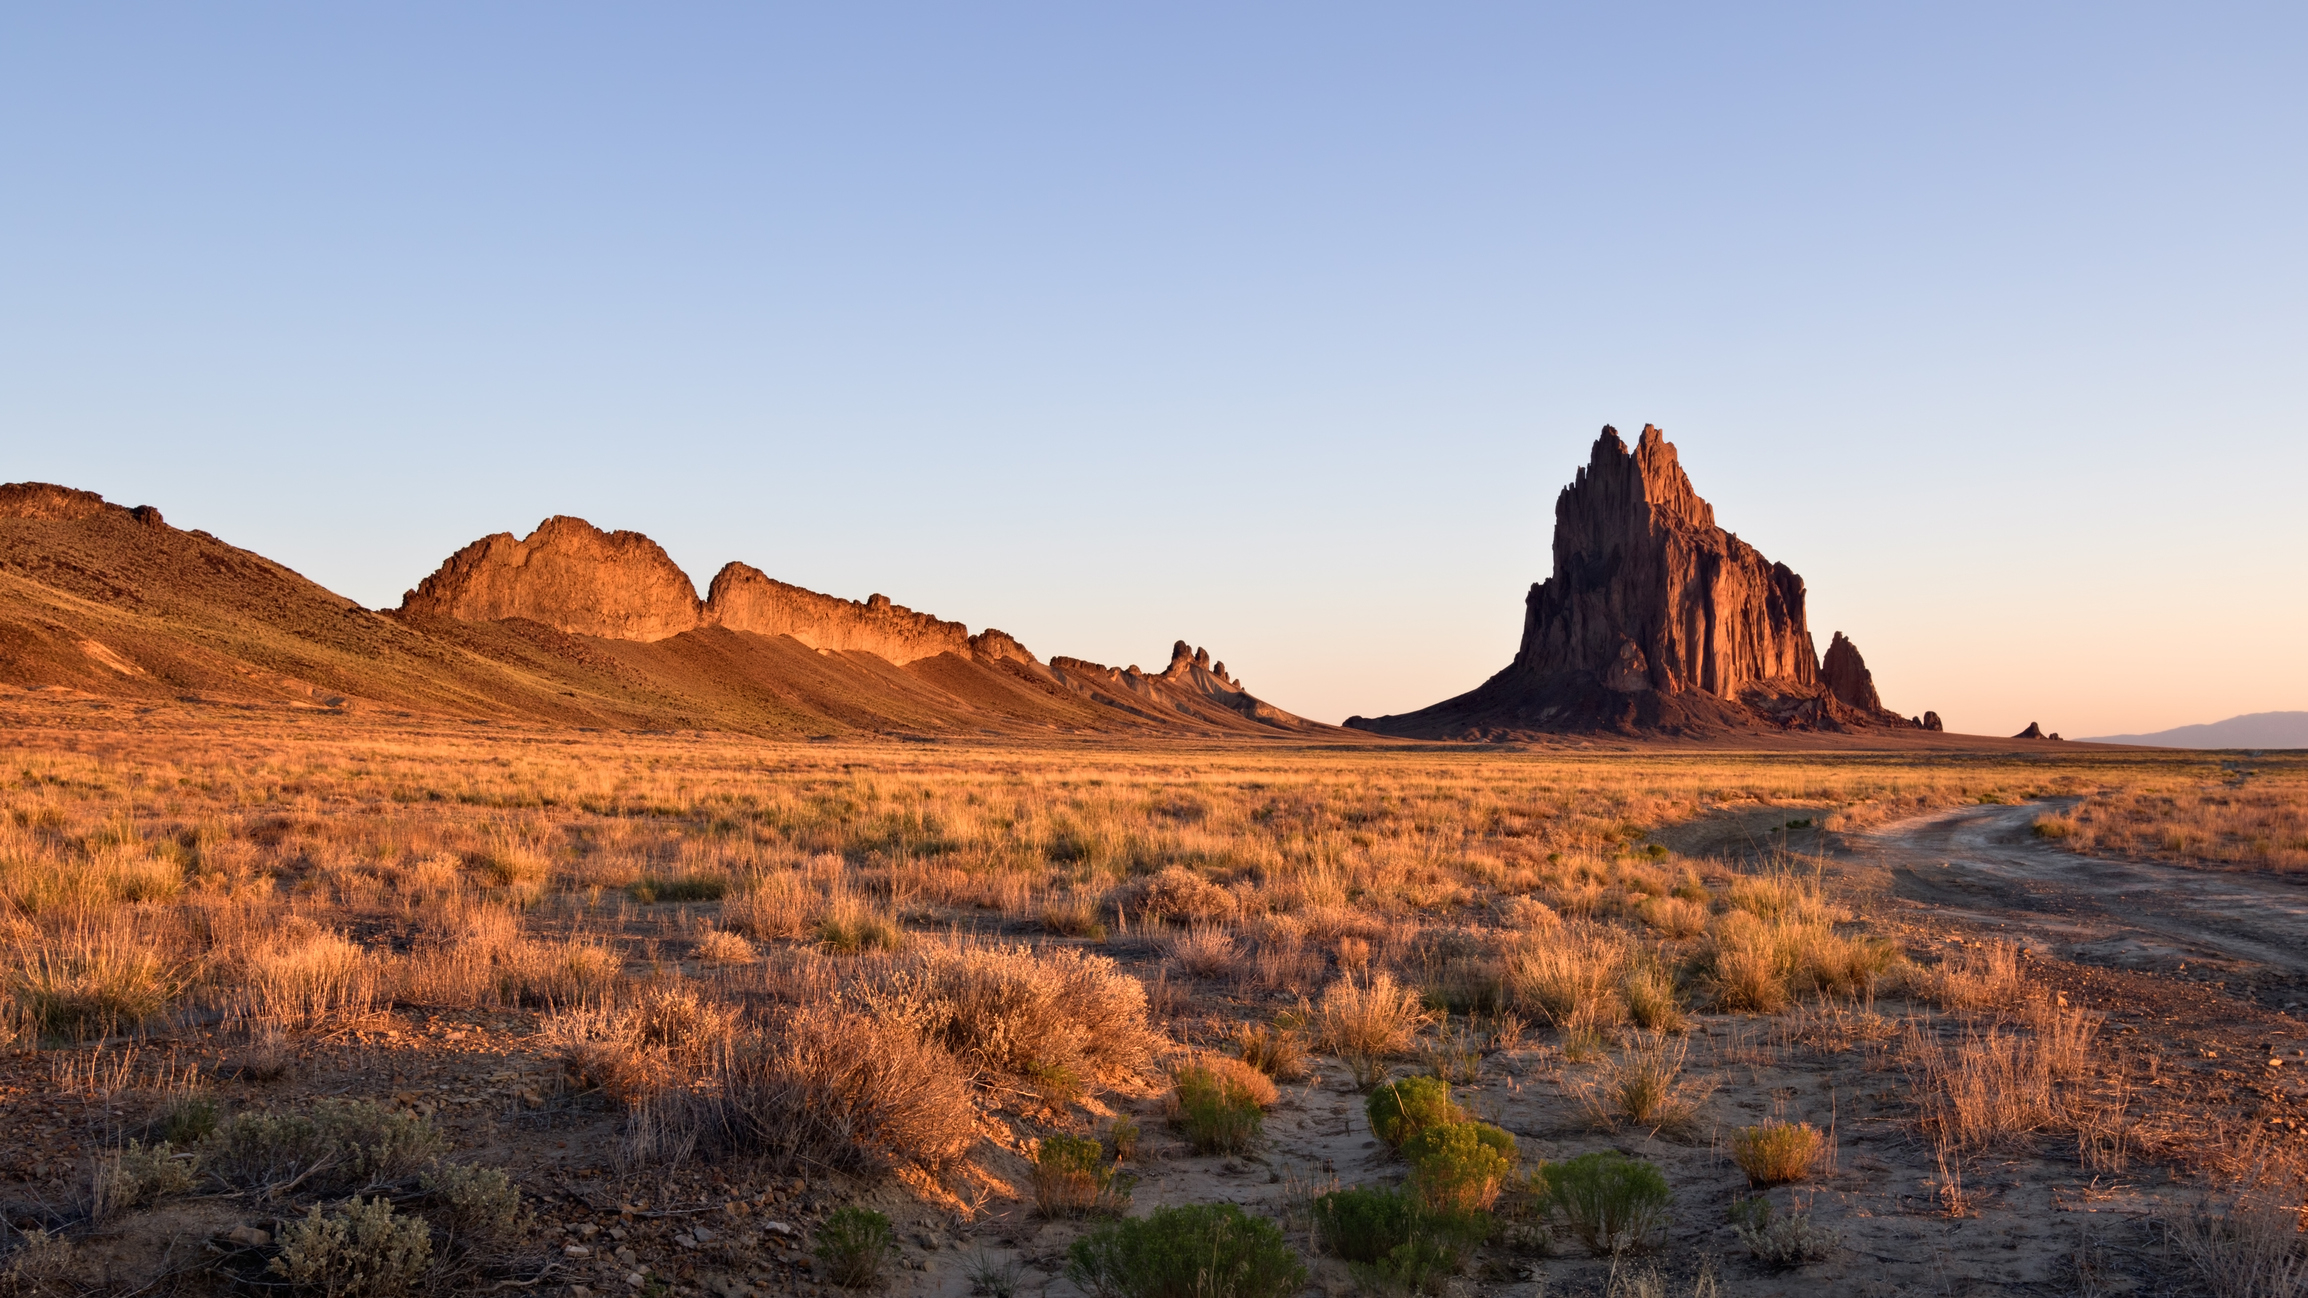 Desert landscape with prominent rock formations and a dirt road under a clear sky at dusk